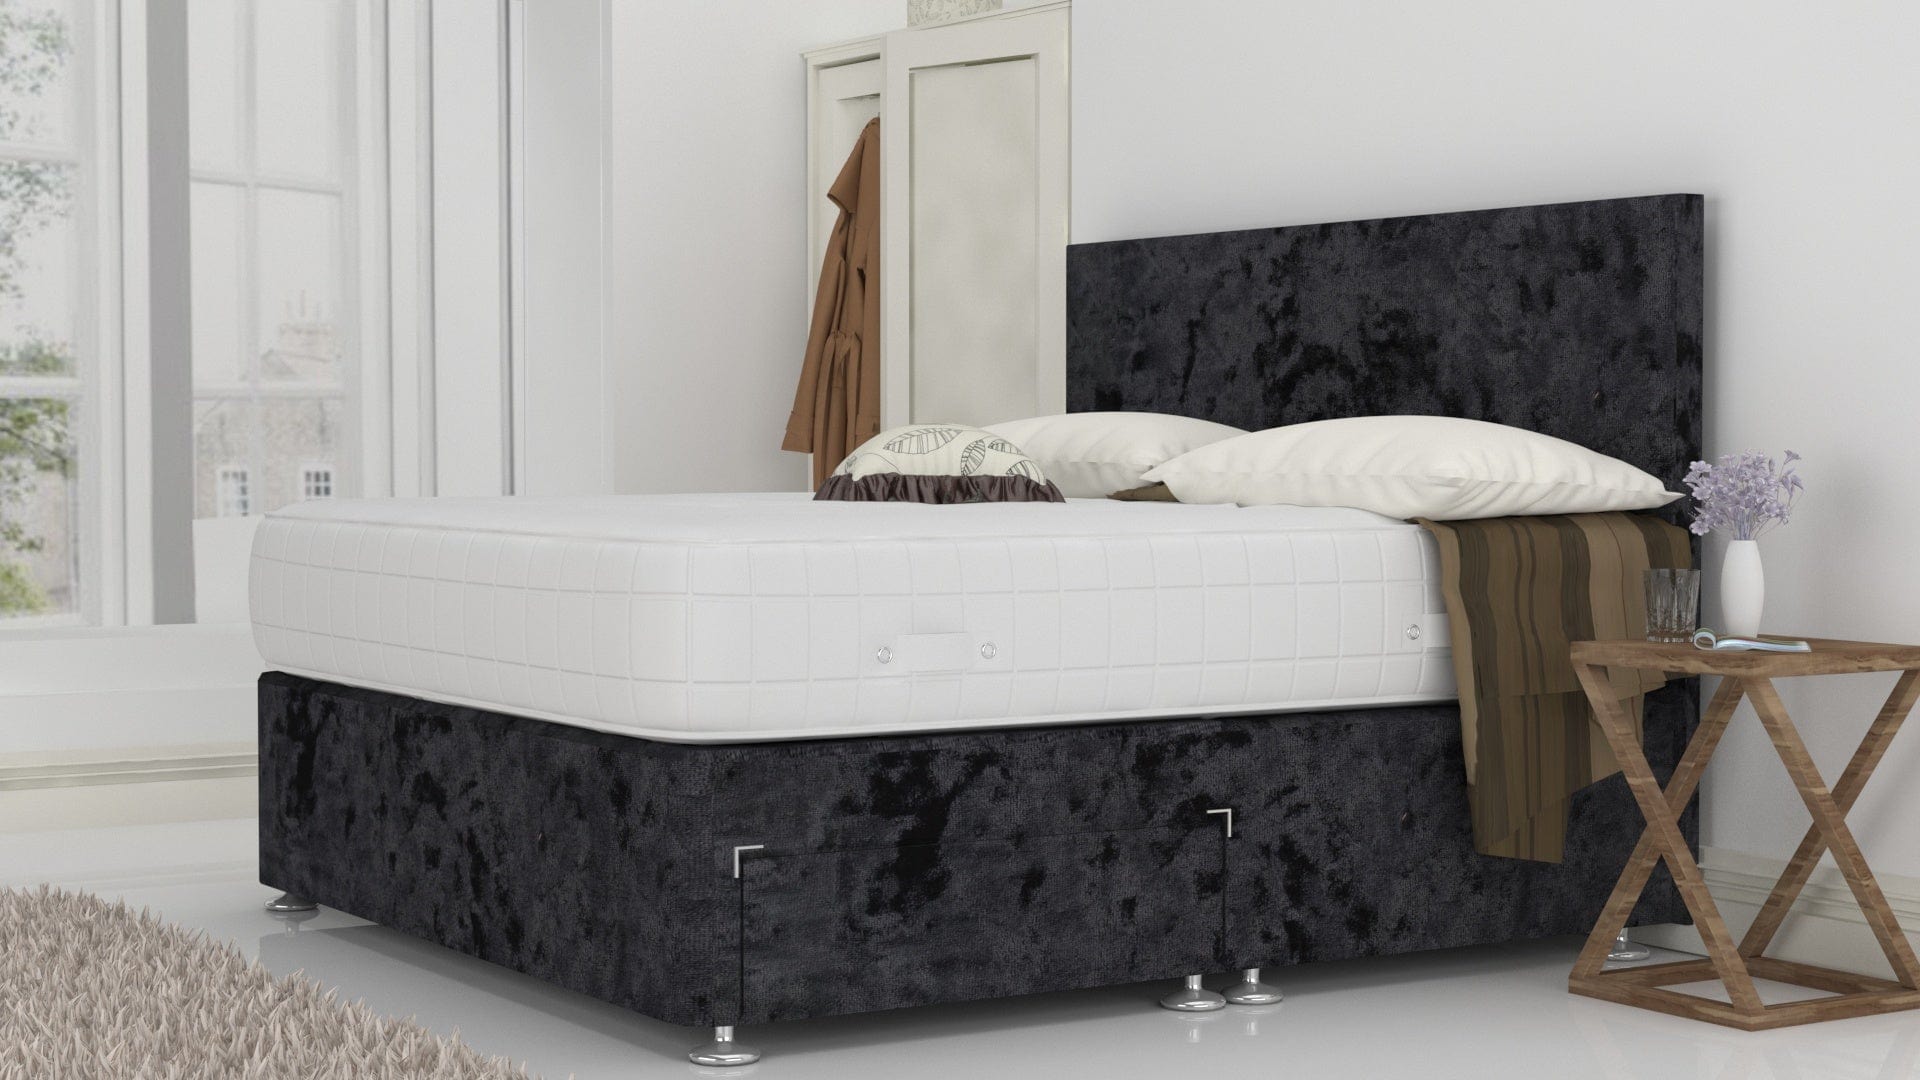 Black Crushed 3 Feet Divan Bed Set With Plain Headboard (Included Feet) And Free Memory Foam Mattress